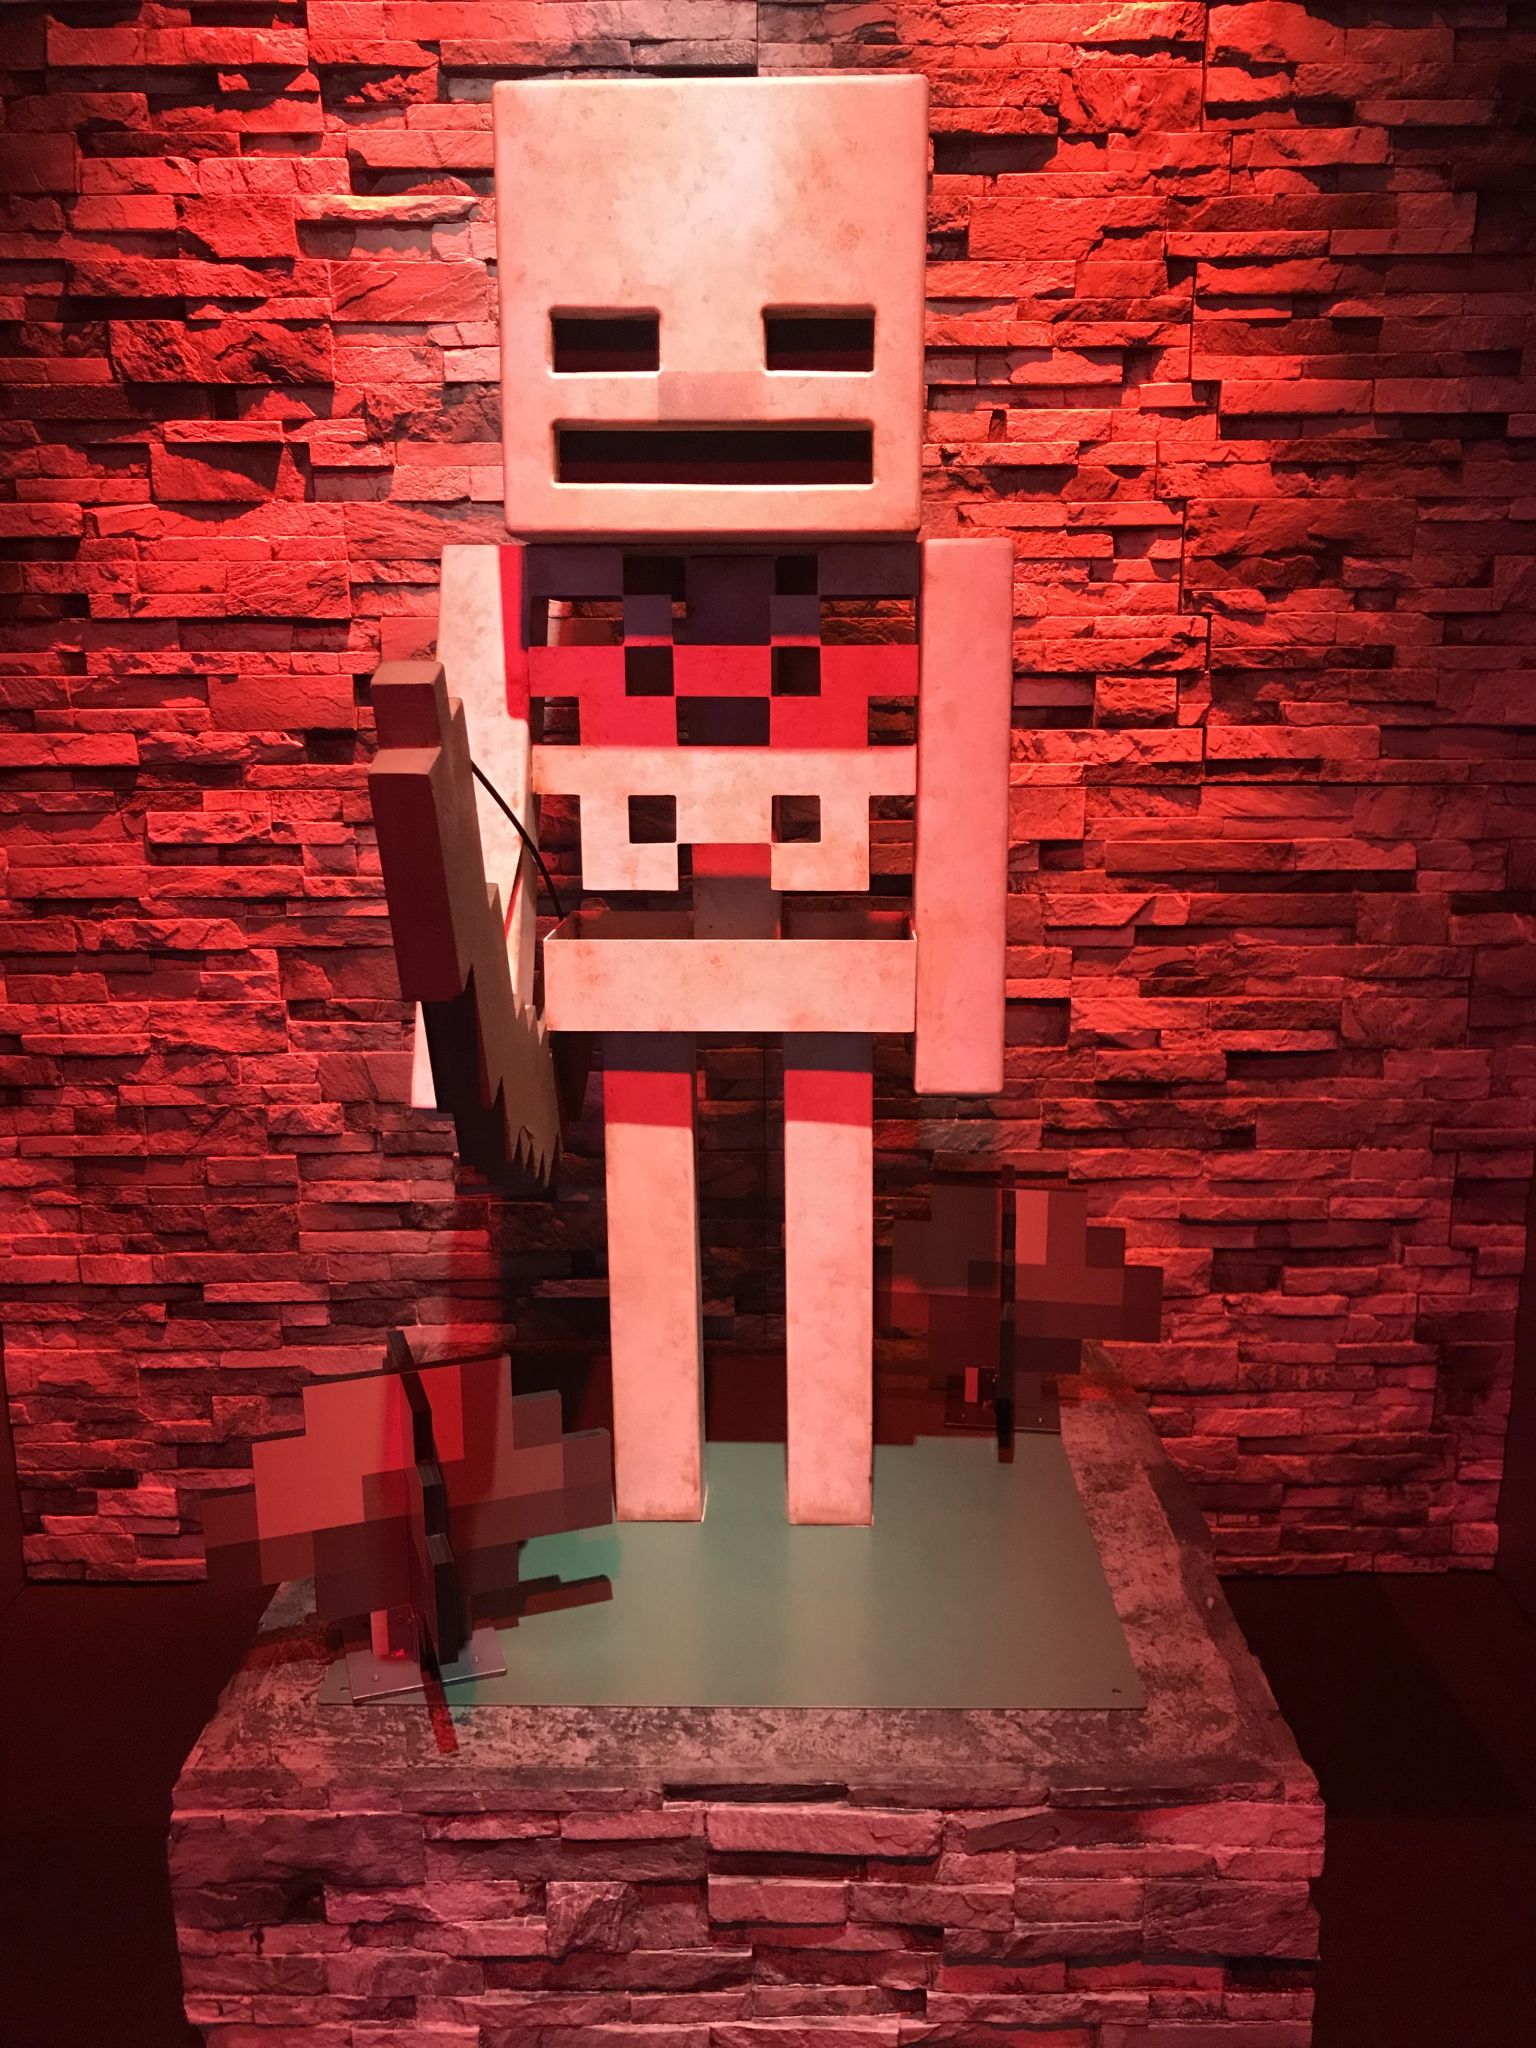 Block by block, ambitious new 'Minecraft: The Exhibition' will celebrate  game at Seattle's MoPOP – GeekWire